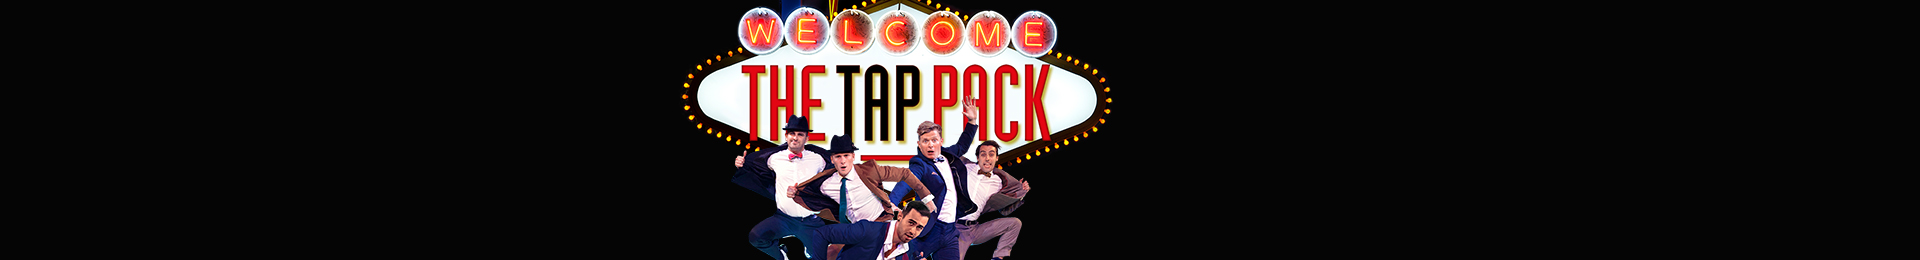 The Tap Pack tickets